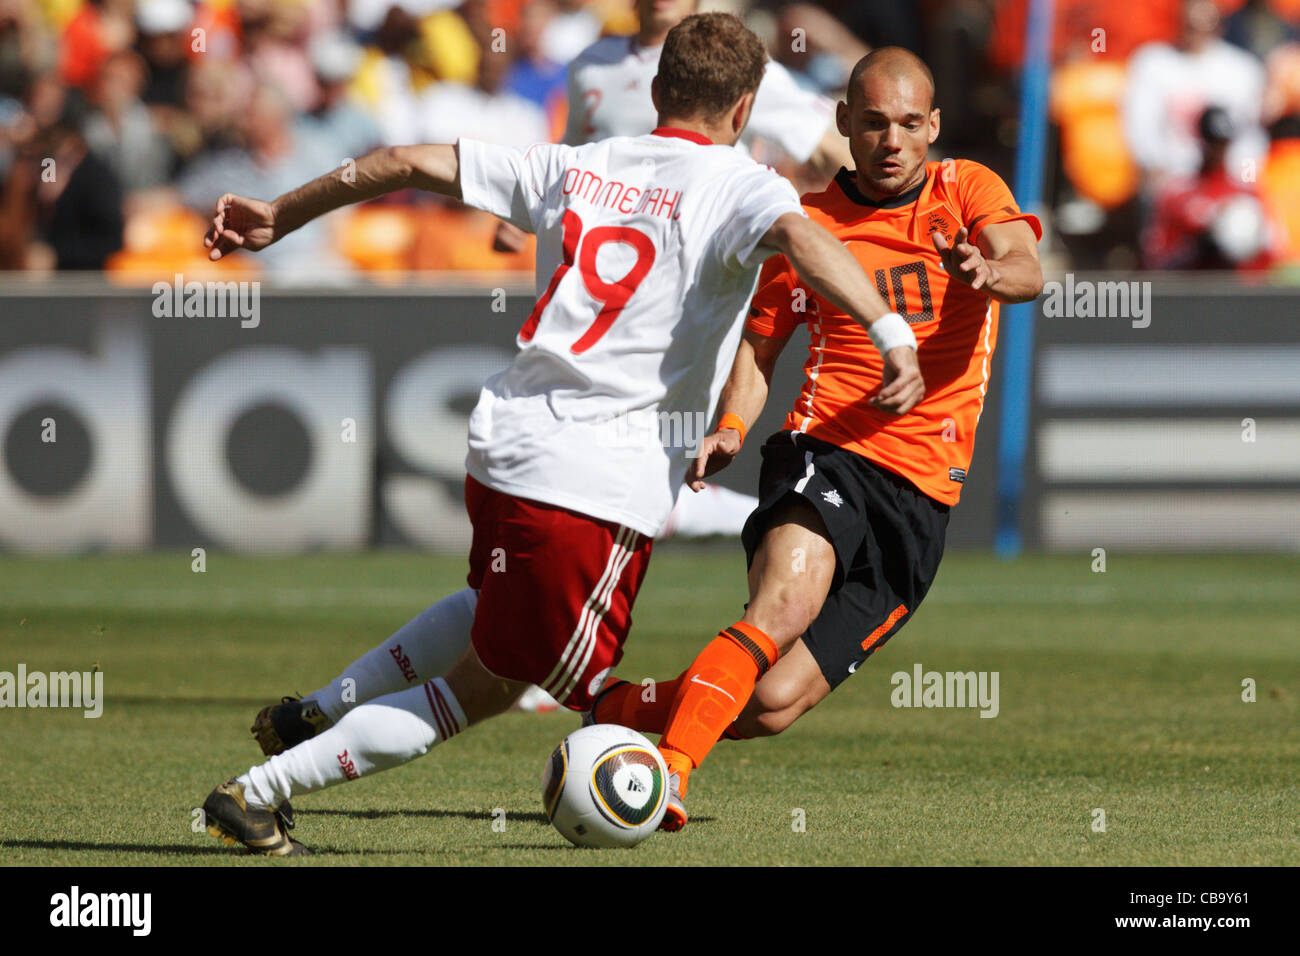 Wesley Sneijder of the Netherlands (R) in action against Dennis Rommedahl of Denmark (L) during a 2010 World Cup match. Stock Photo